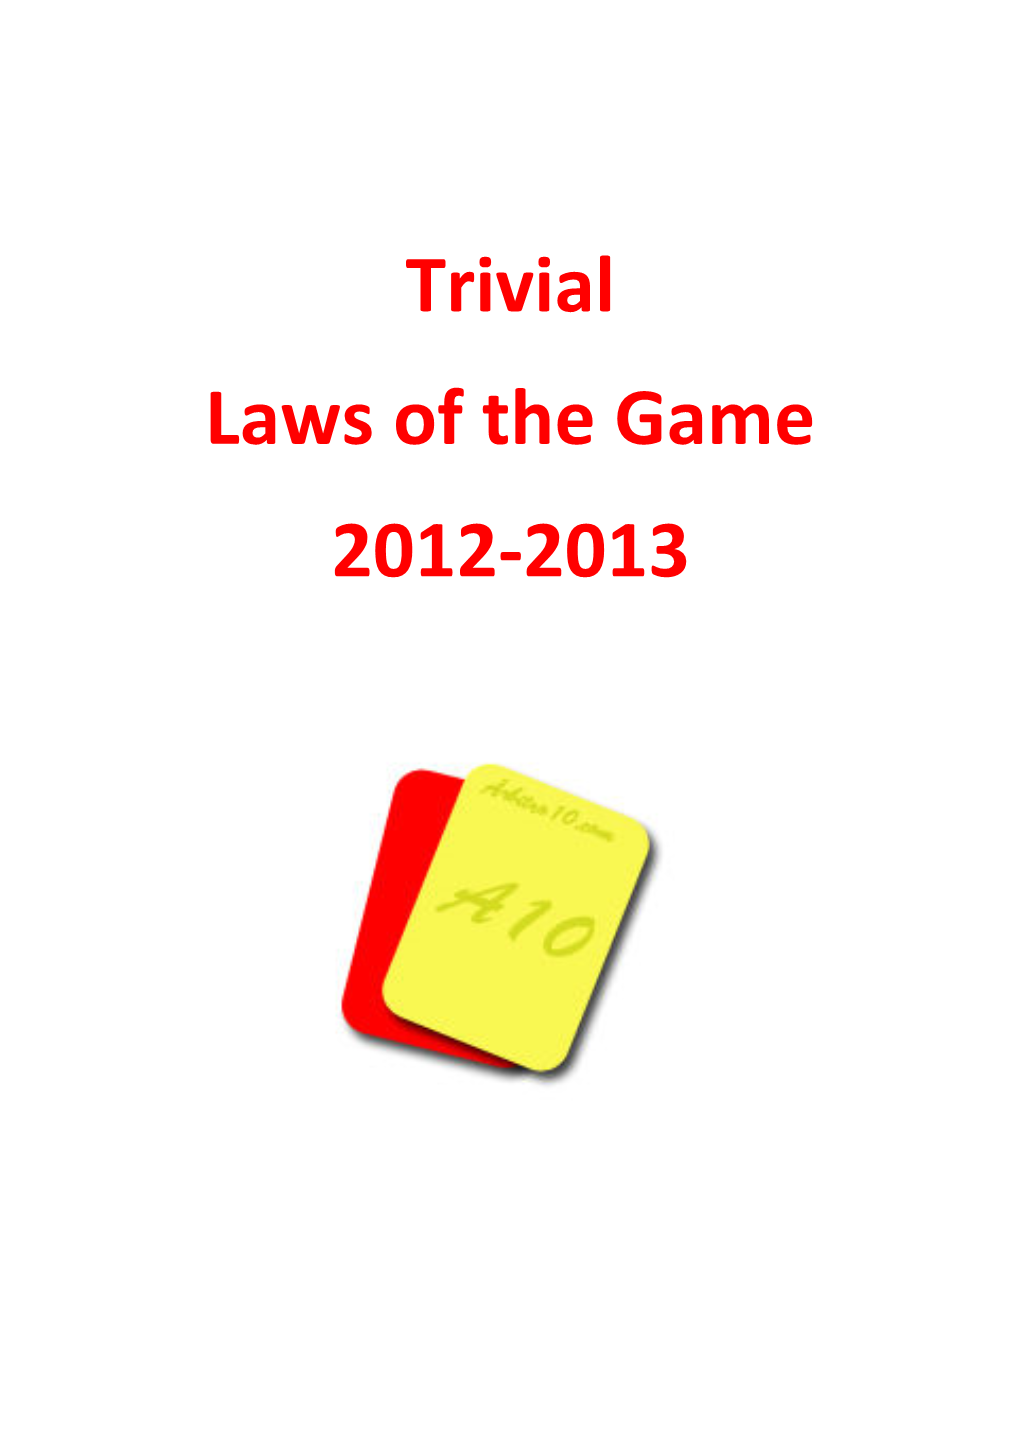 Trivial Laws of the Game 2012-2013